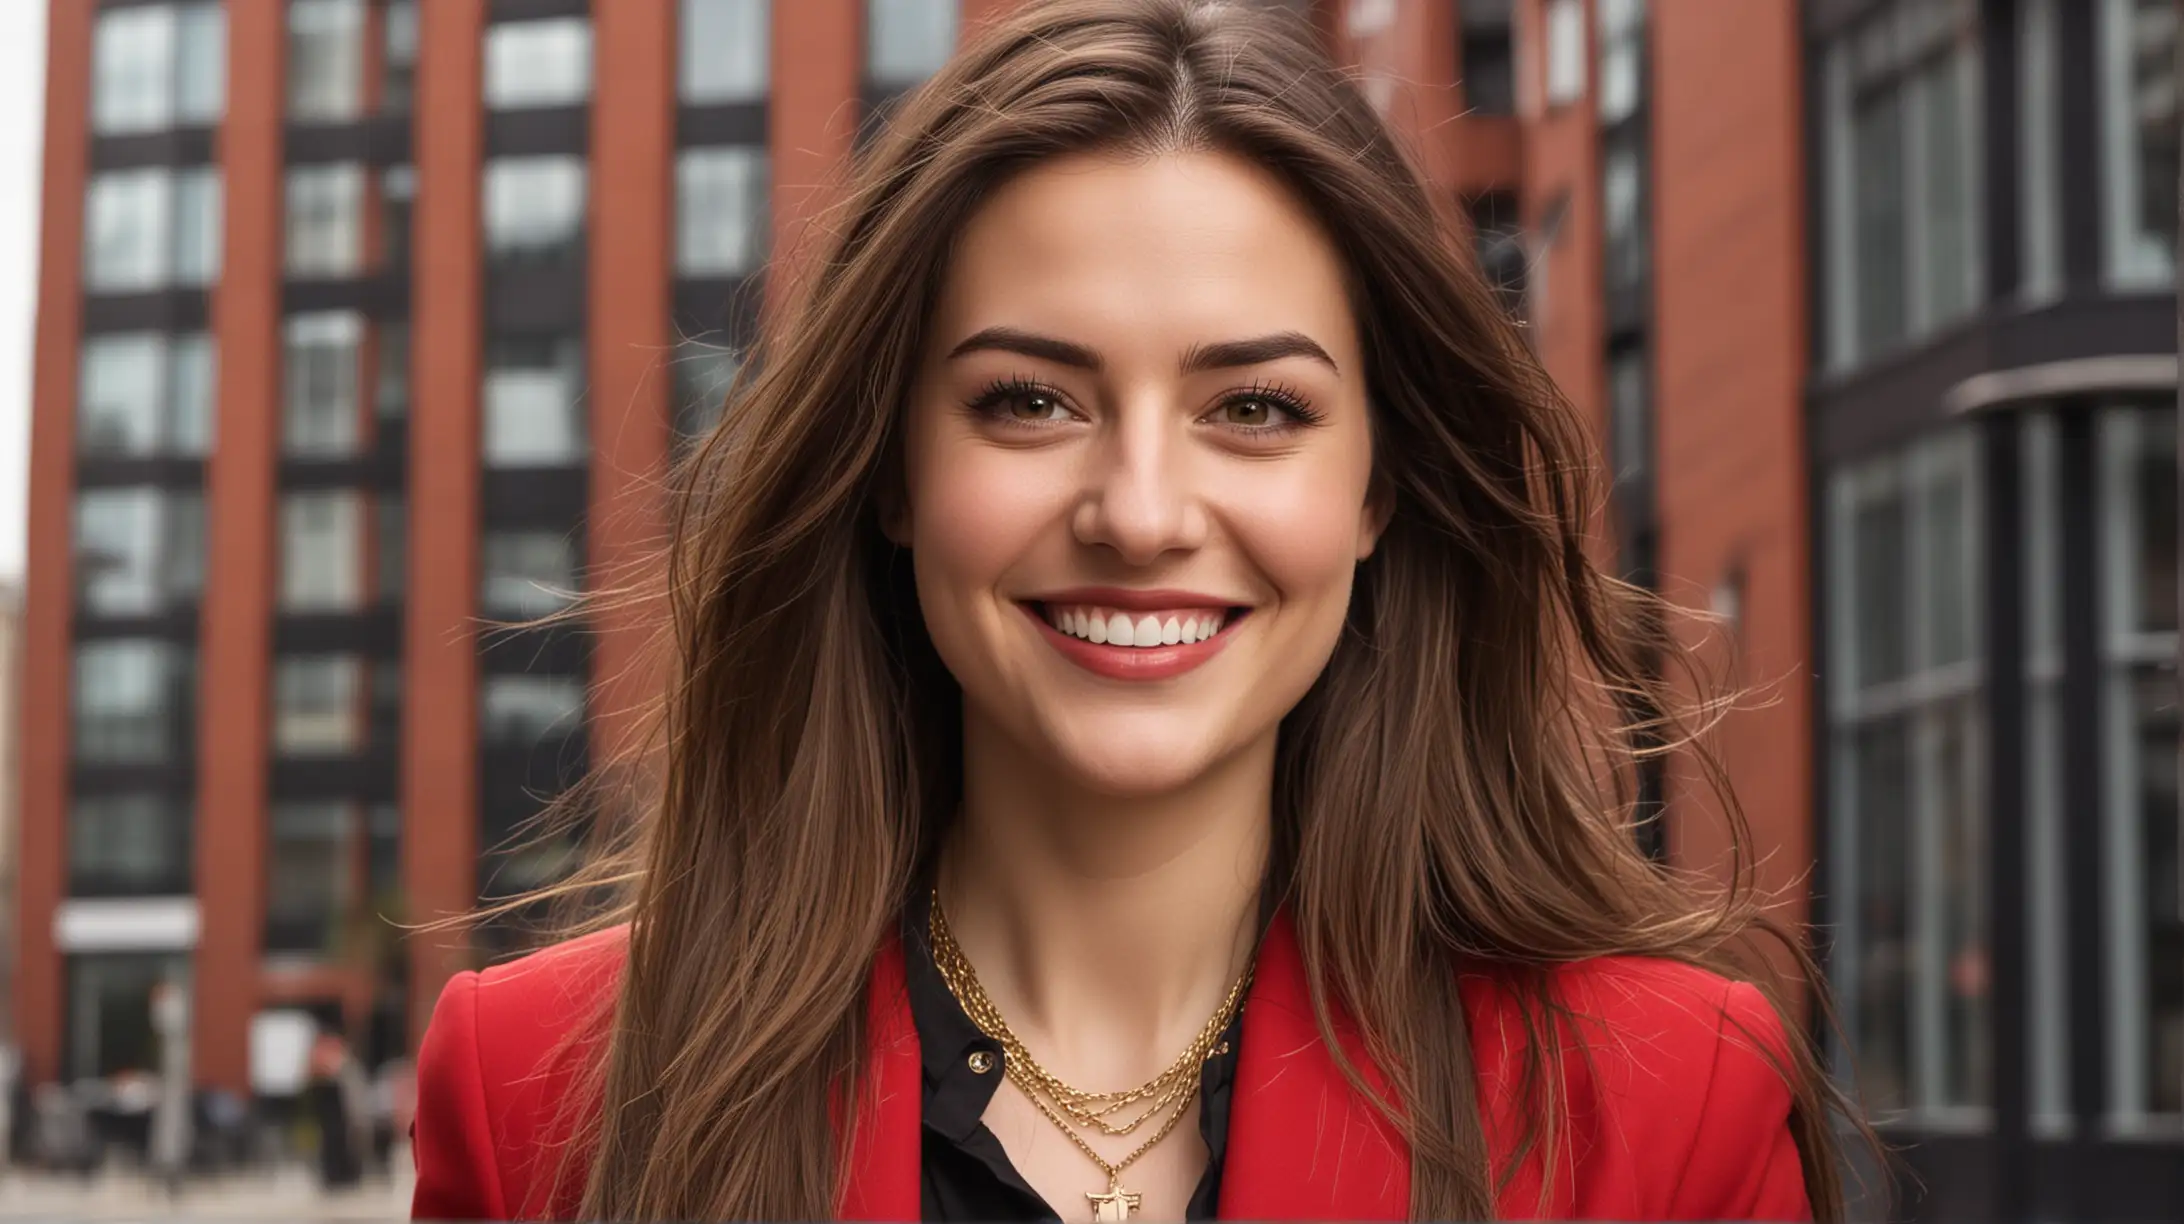 Stylish Smiling Woman in Red Blazer against Urban Cityscape